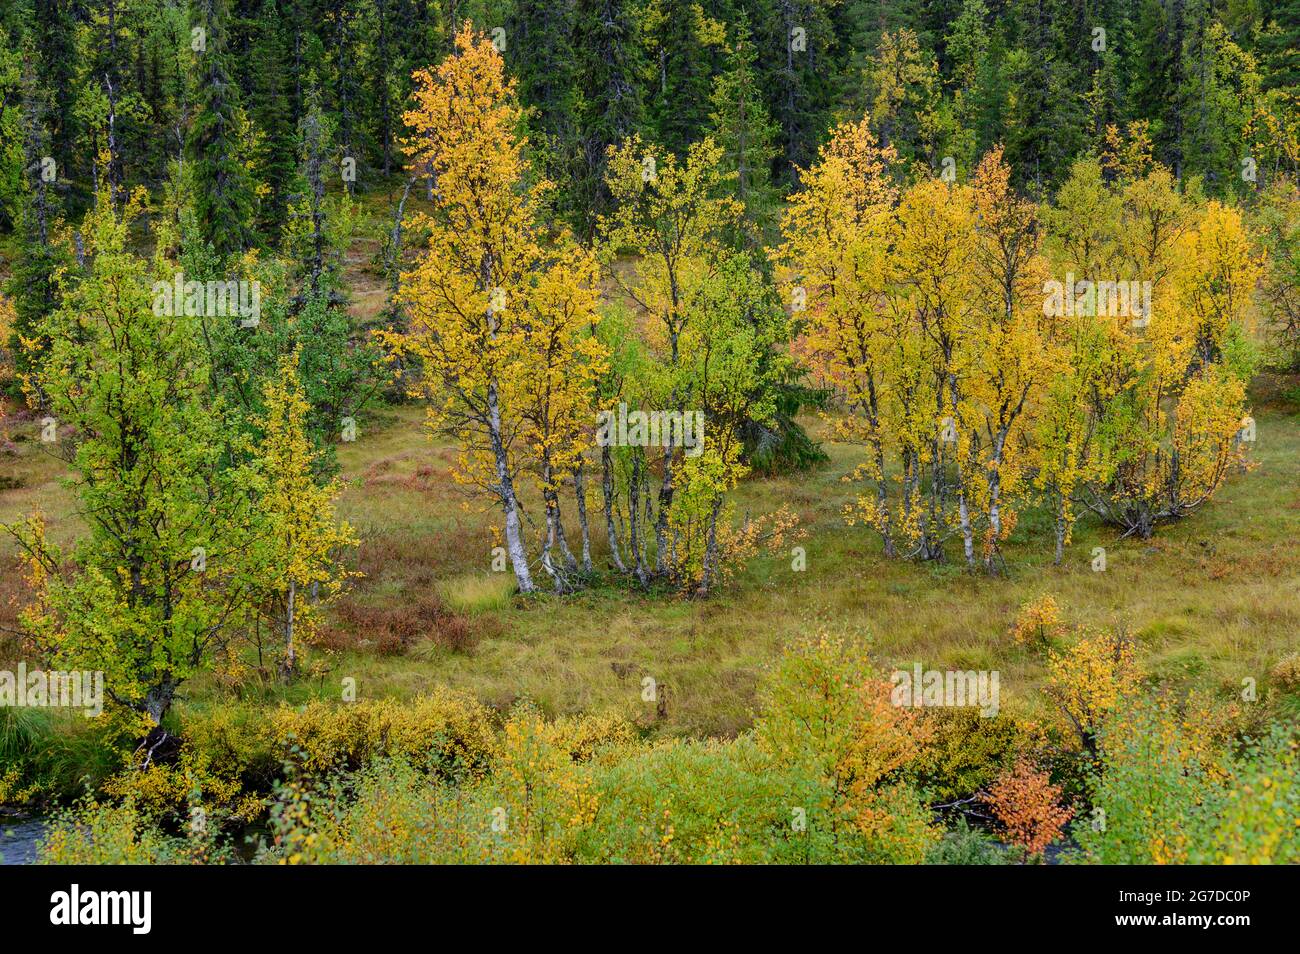 Birch trees with intense yellow fall colours on Ripfjället, Vemdalen, Sweden Stock Photo